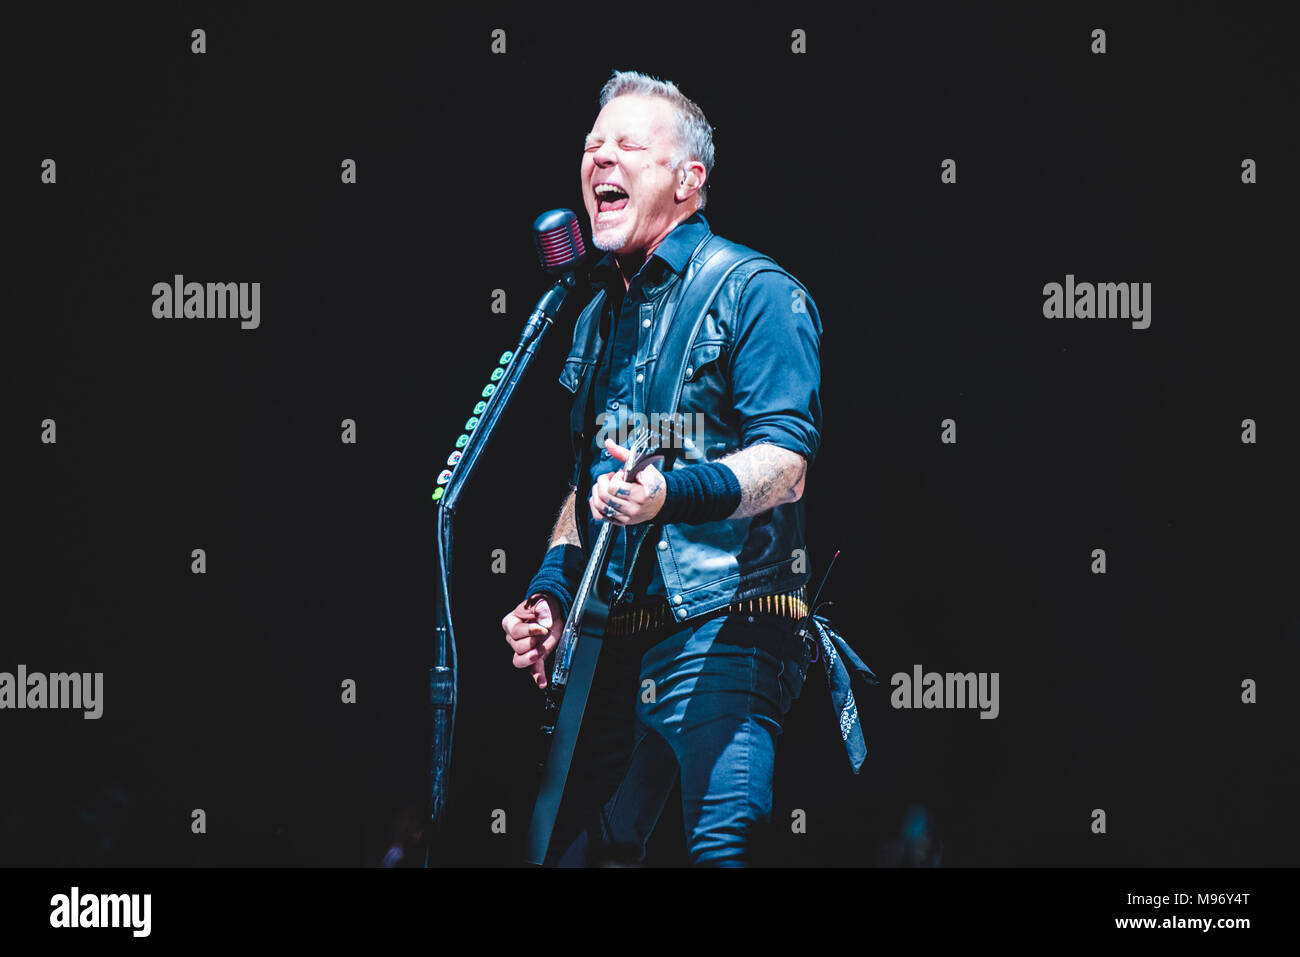 Italy:The american band Metallica performing live on stage in Torino, for the 'Worldwired' tour concert. Photo: Alessandro Bosio/Alamy Live News Stock Photo